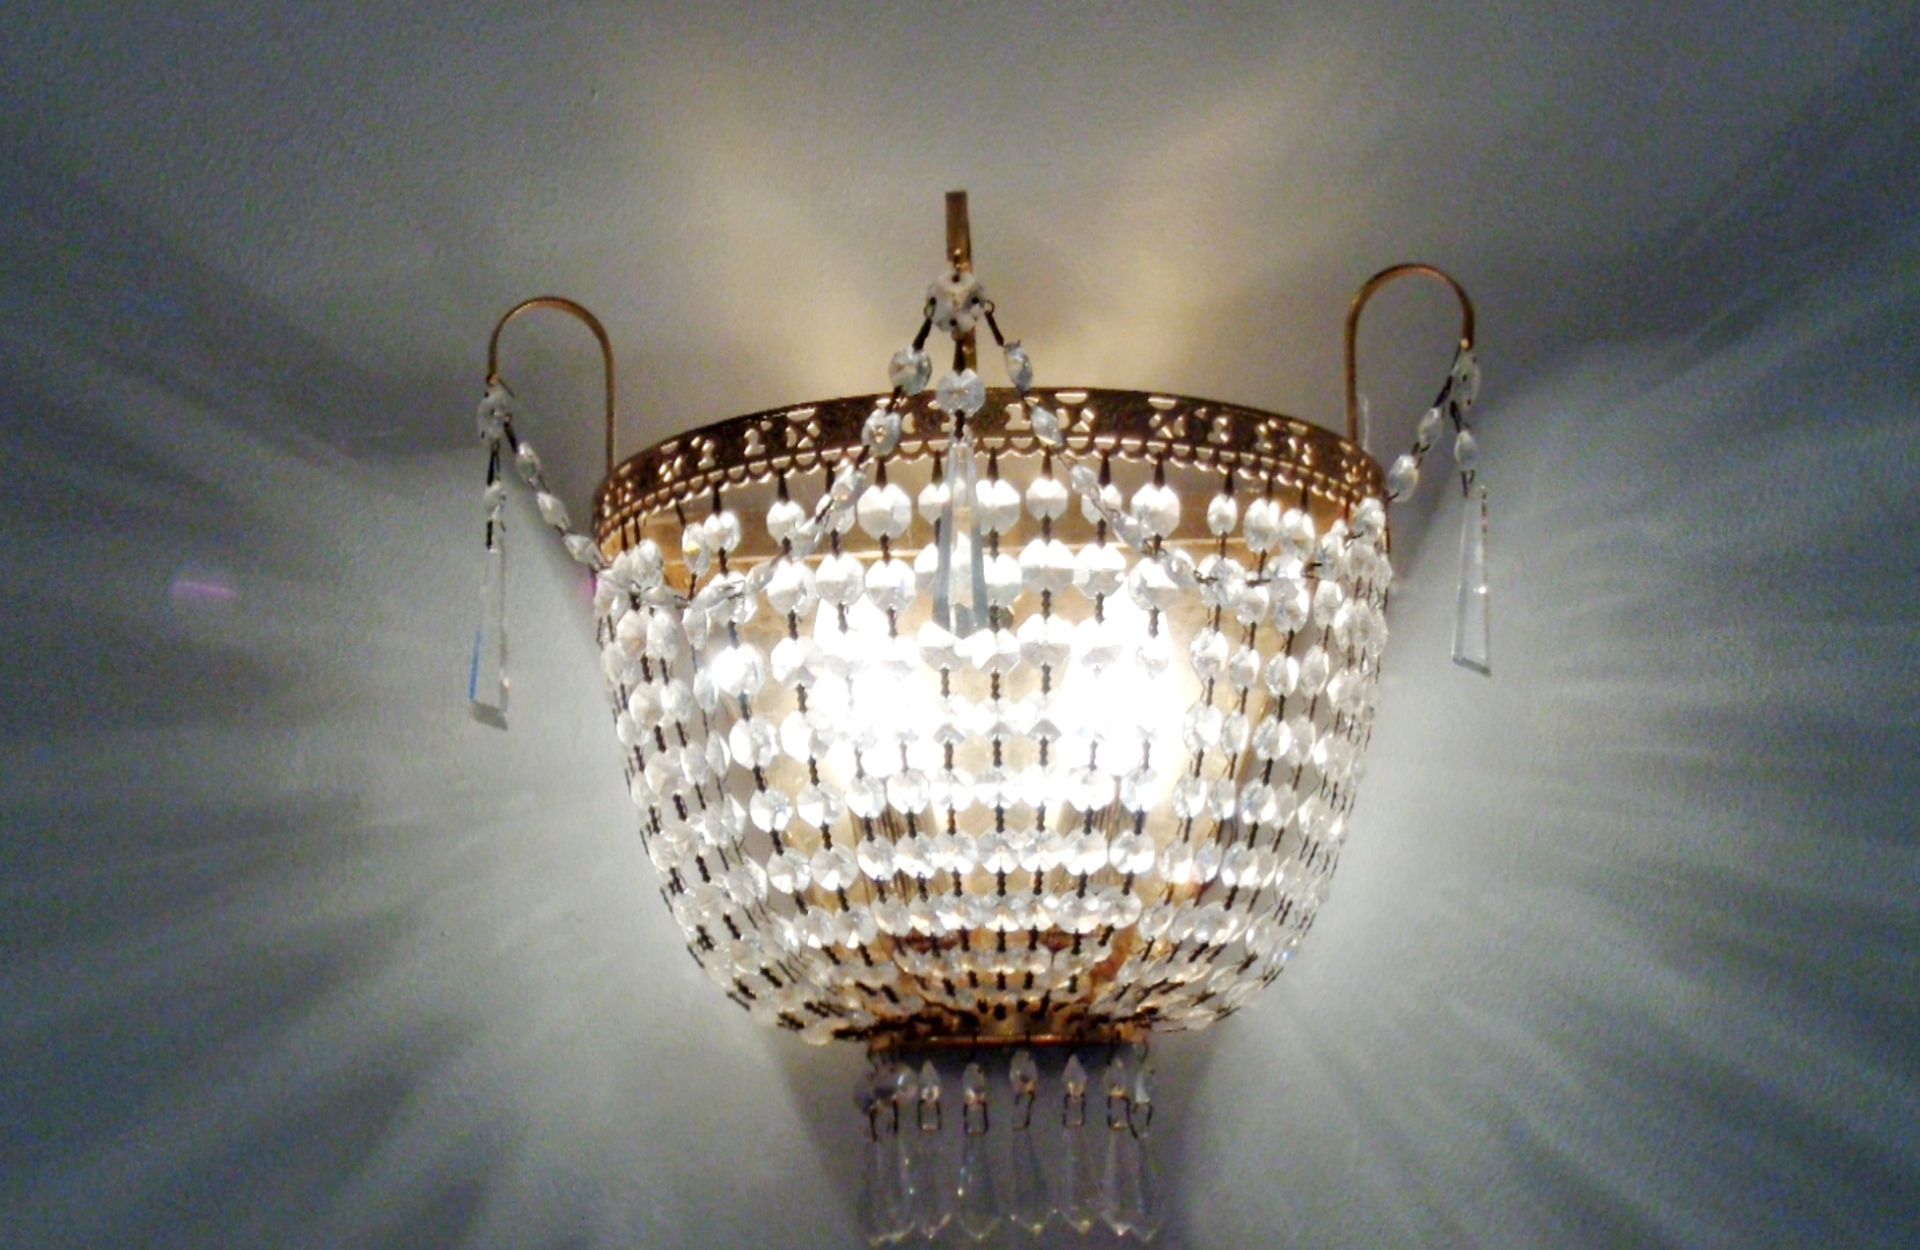 3 X Swarovski Crystals 31Cms High X 31Cms Wide Wall Light To Match Lots 421 And 422